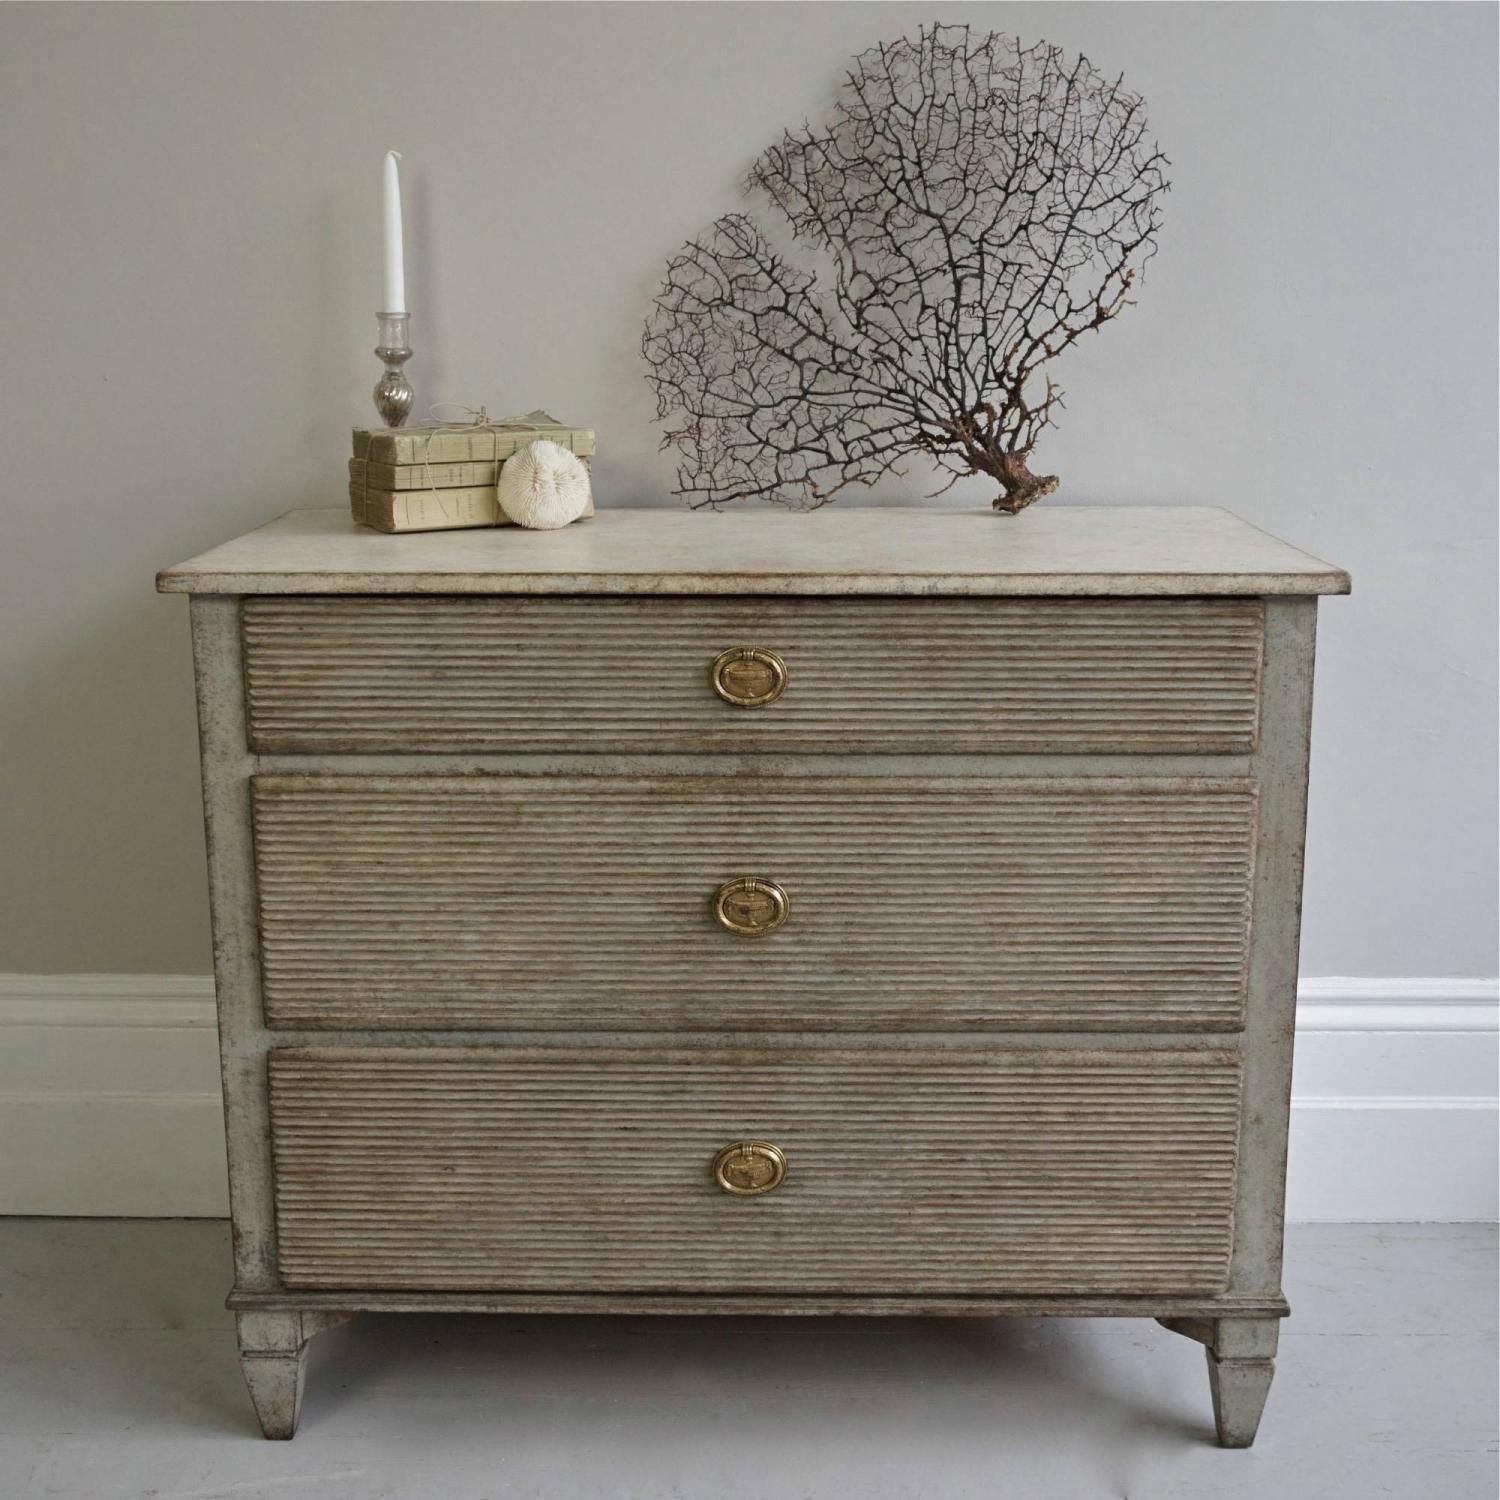 DECORATIVELY CARVED SWEDISH GUSTAVIAN STYLE CHEST 